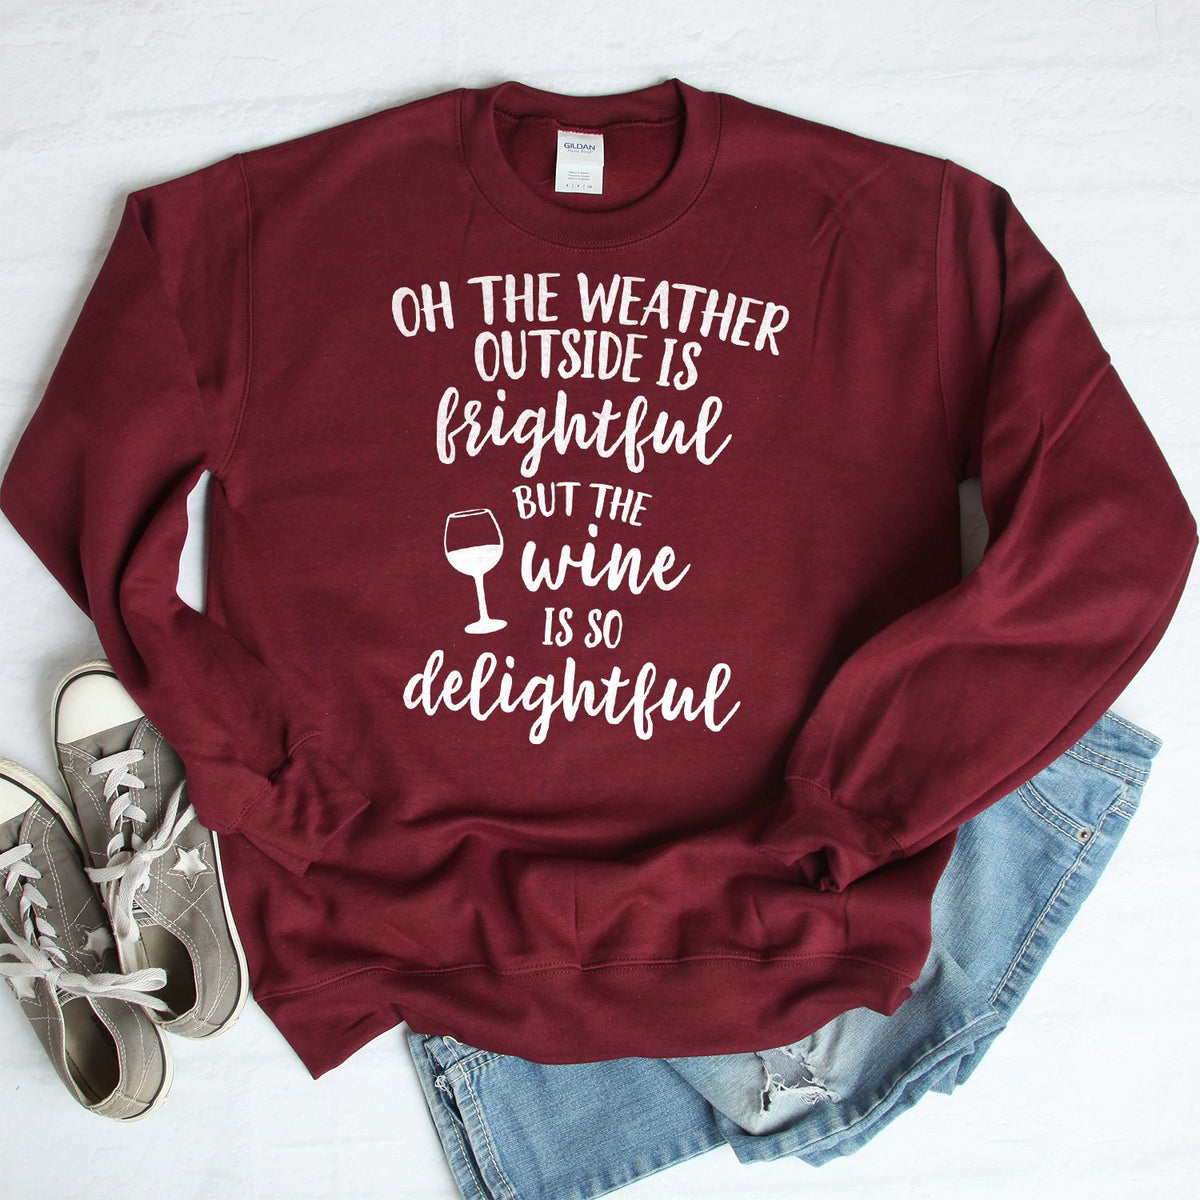 Oh The Weather Outside is Frightful But The Wine is So Delightful - Long Sleeve Heavy Crewneck Sweatshirt